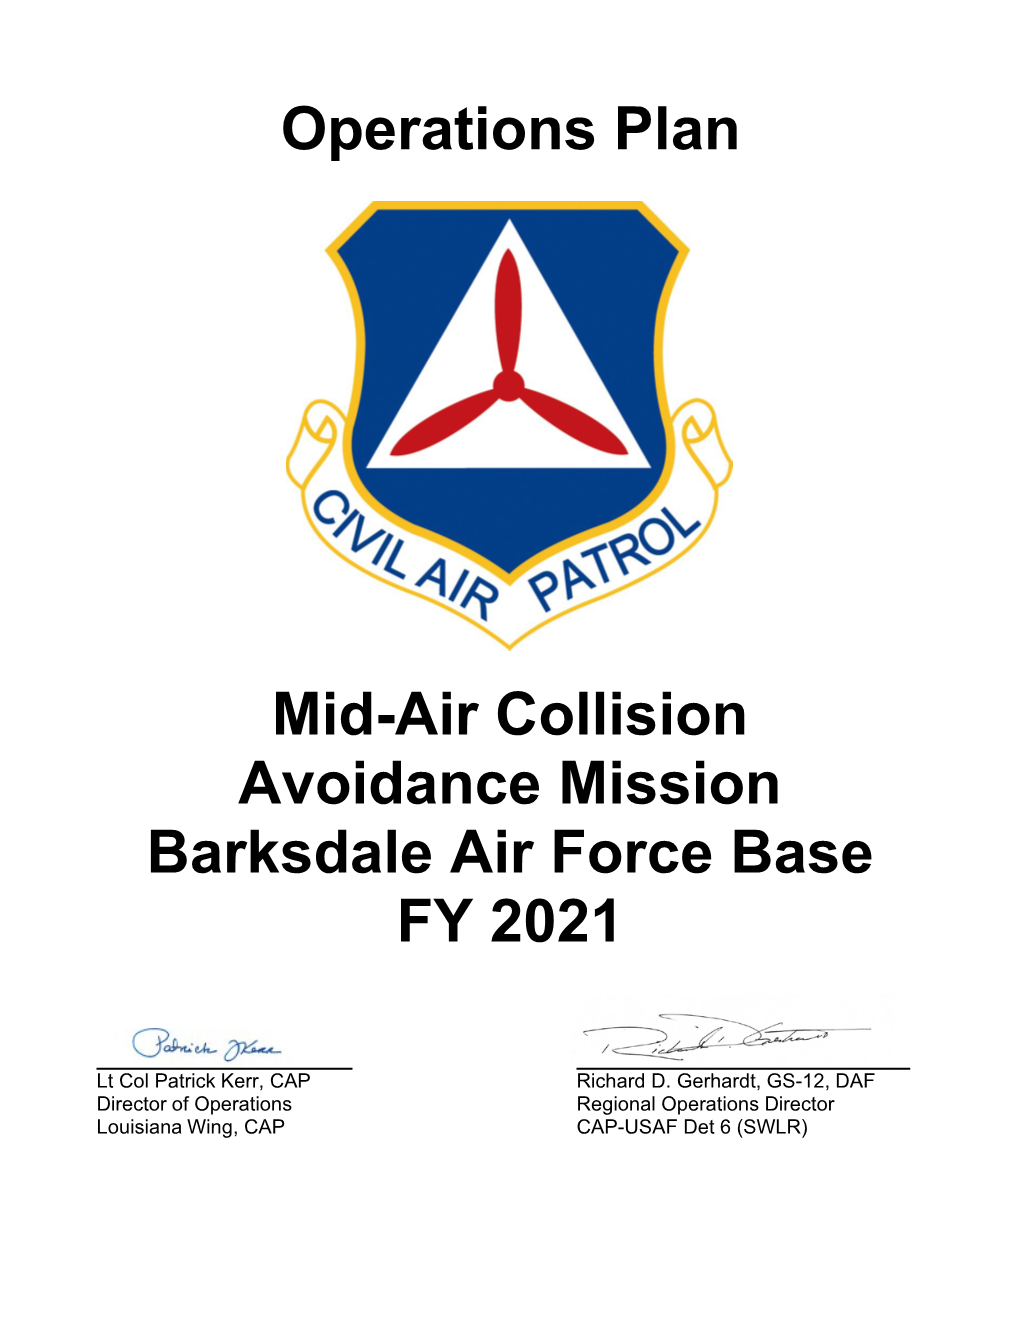 Operations Plan Mid-Air Collision Avoidance Mission Barksdale Air Force Base FY 2021